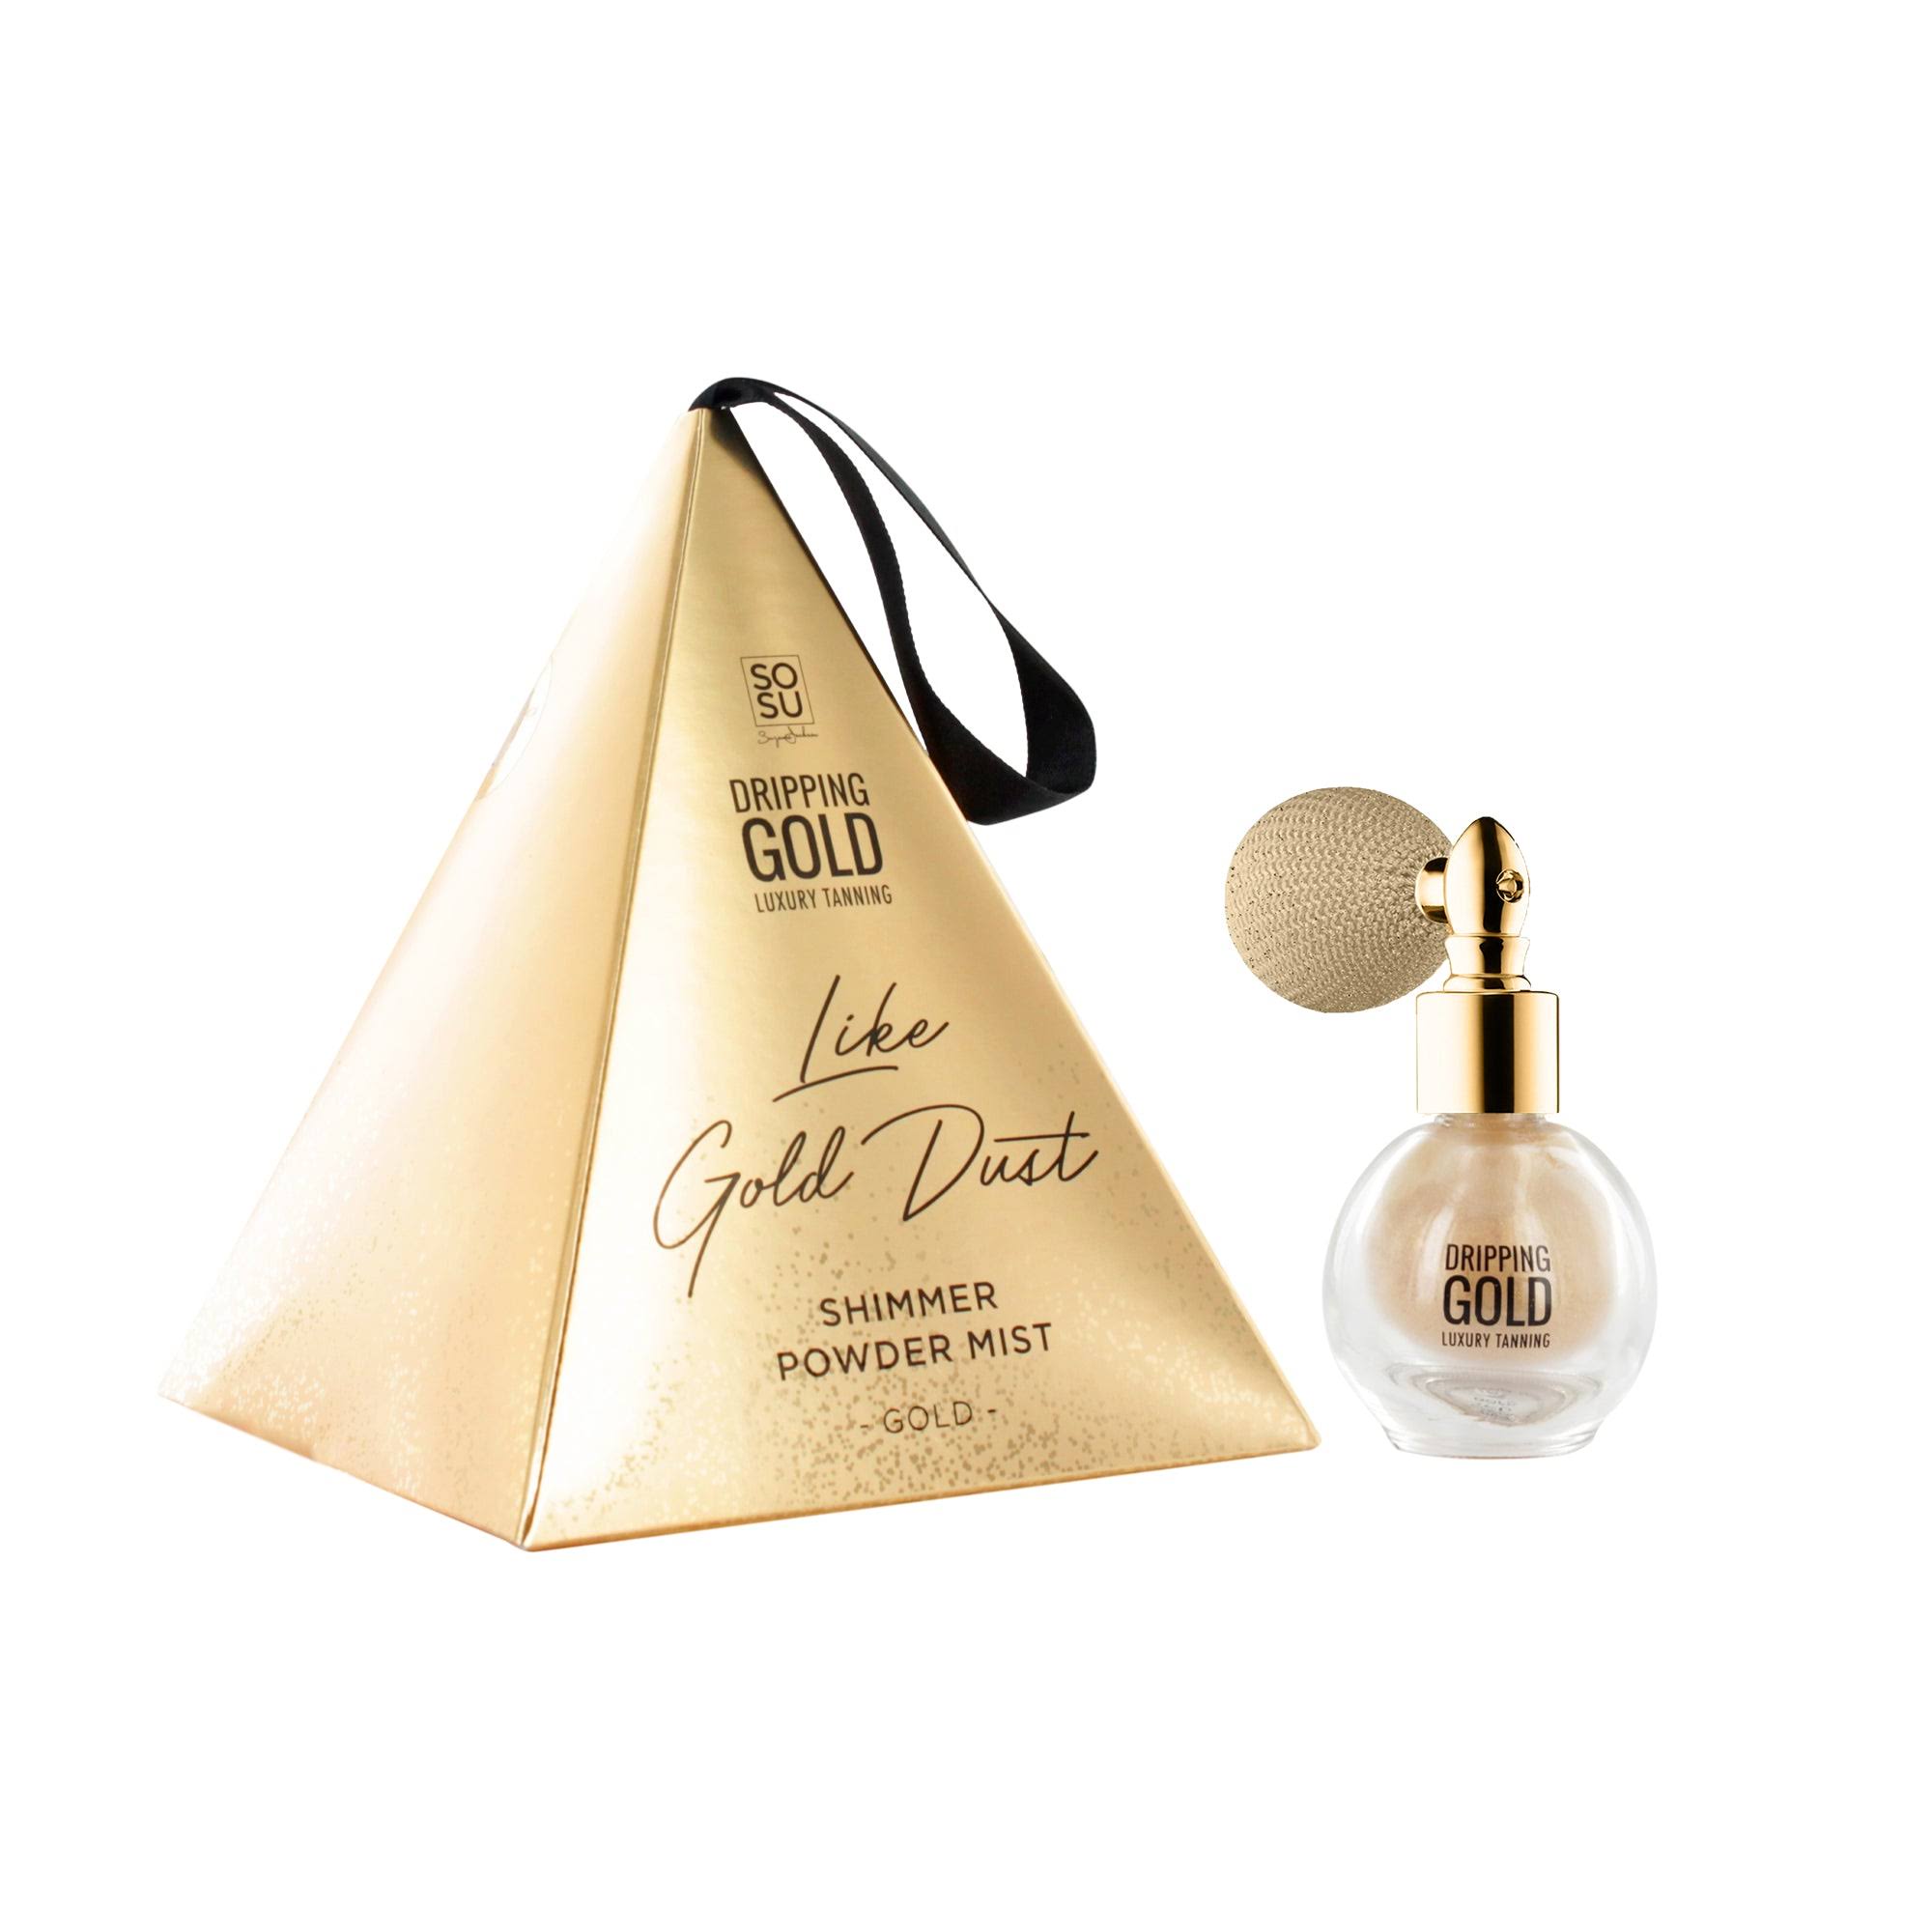 SOSU by Suzanne Jackson Dripping Gold Like Gold Dust Shimmer Mist Gift